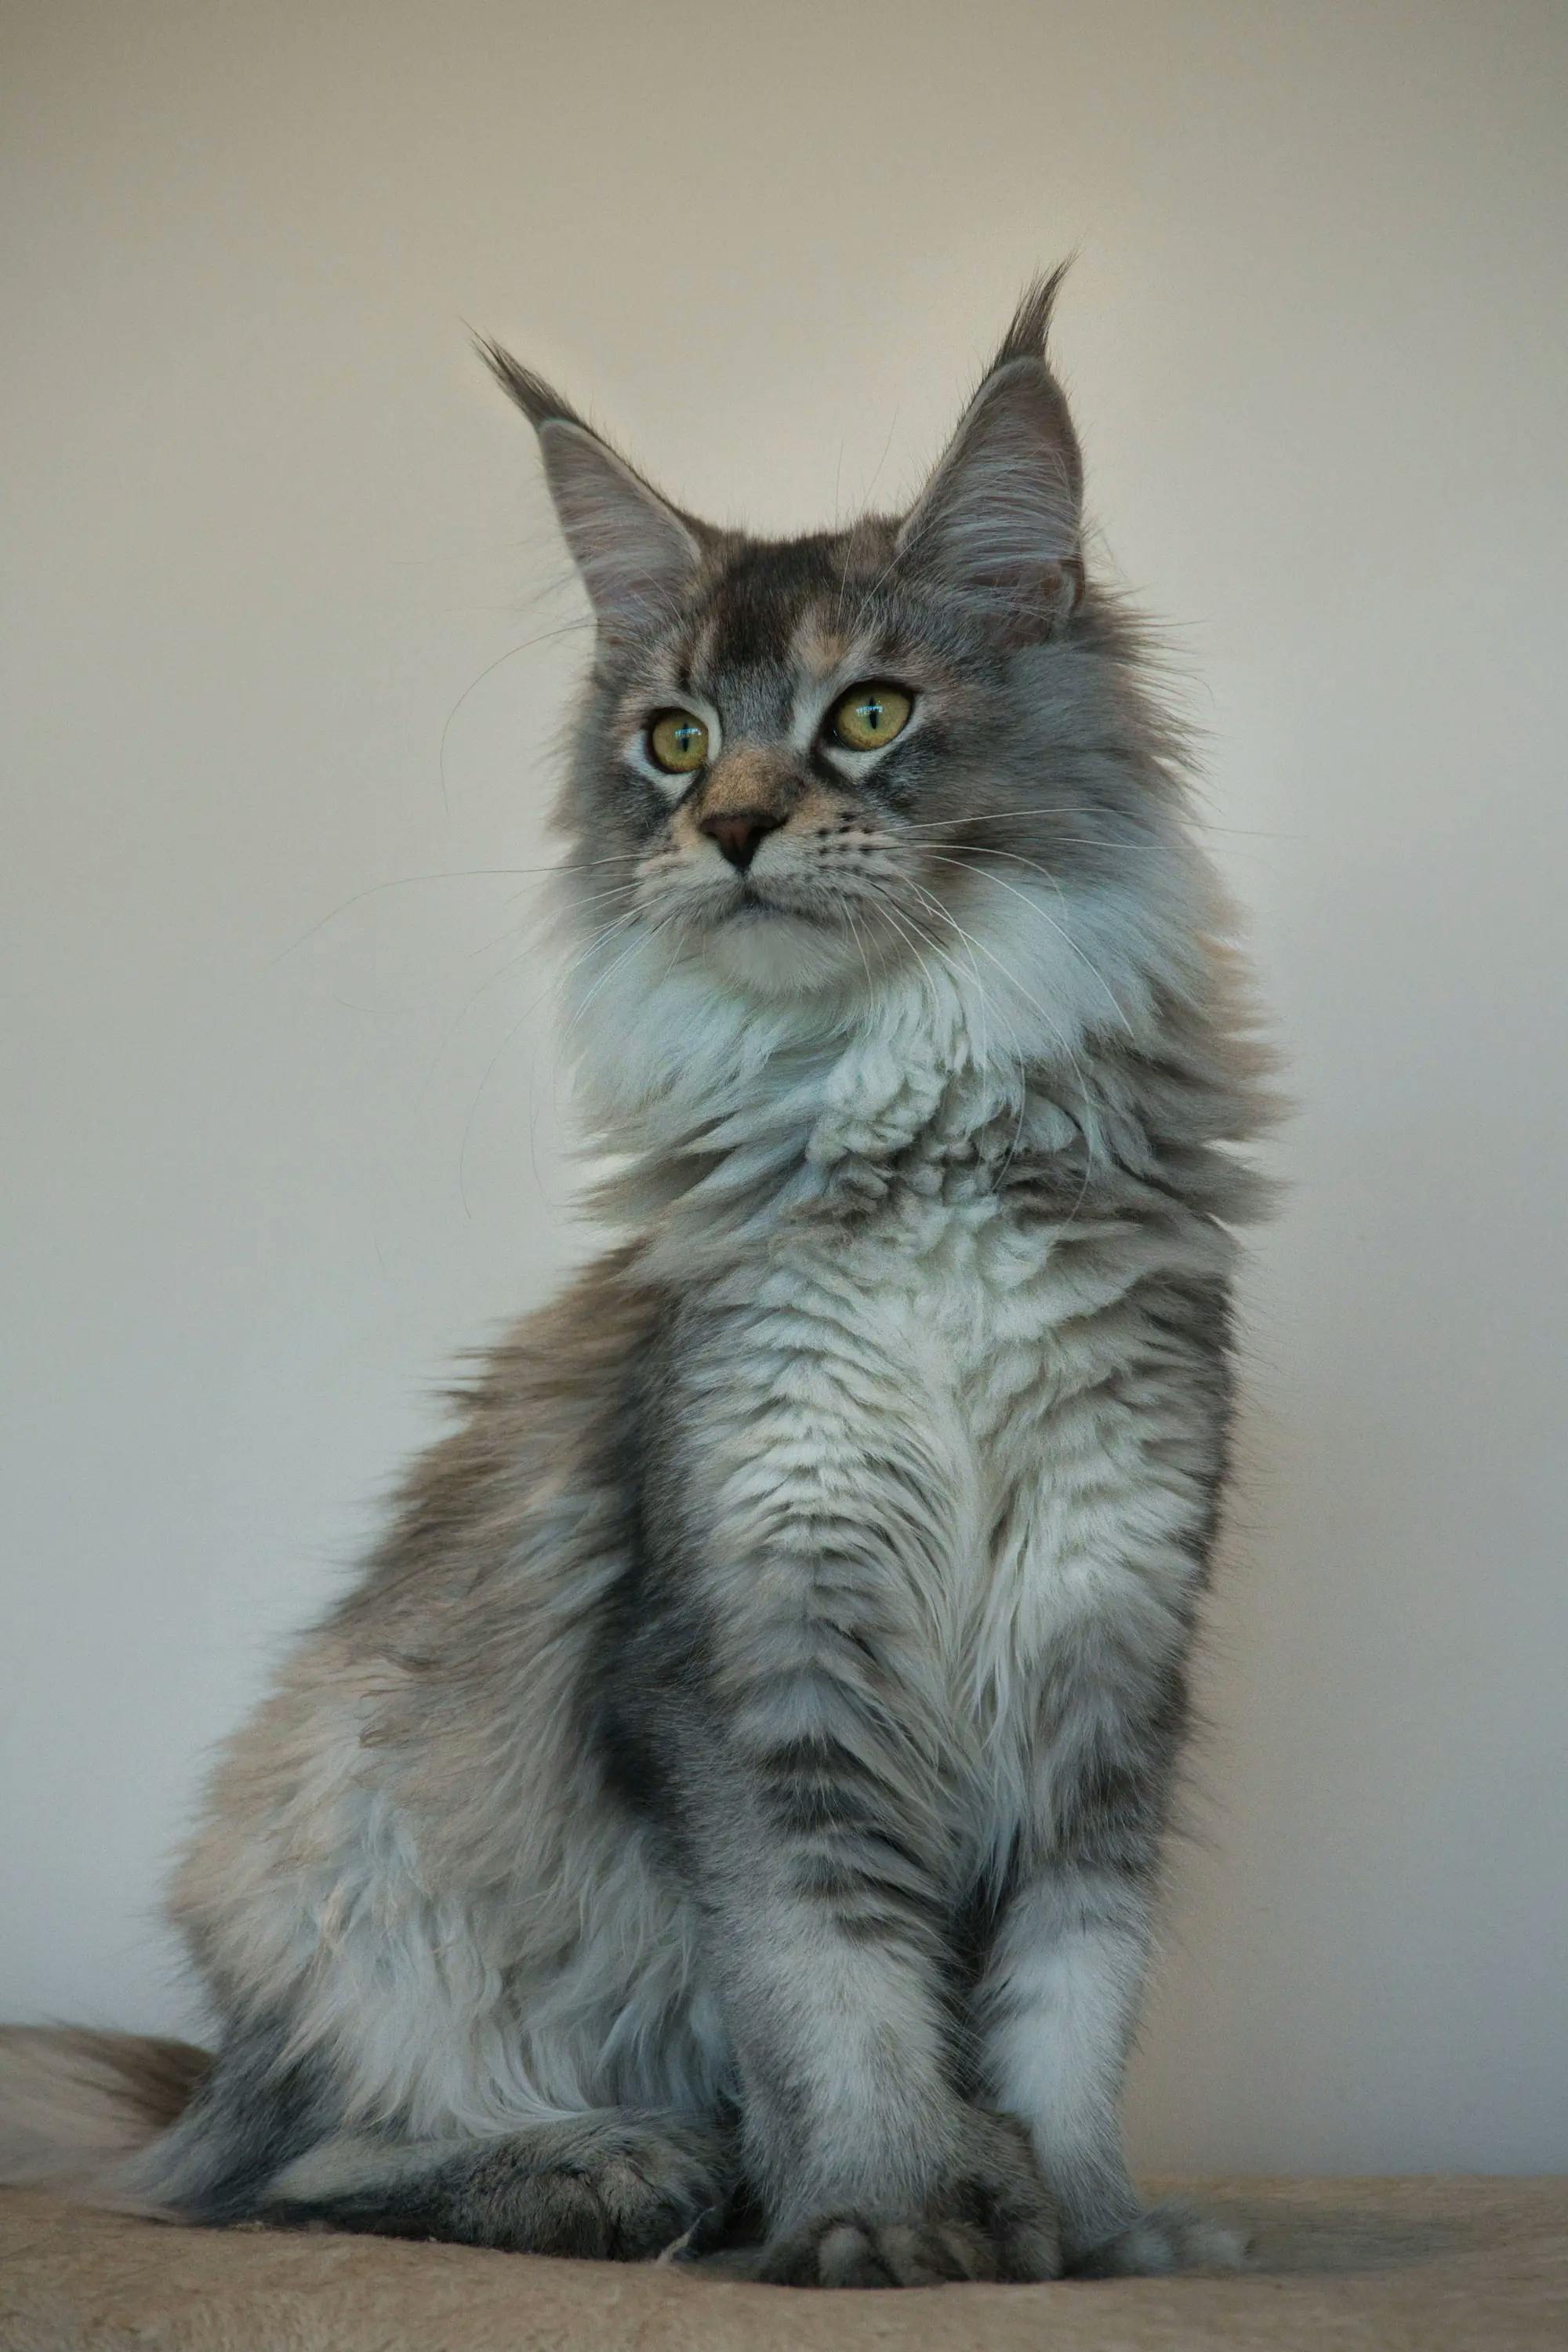 venus--female-maine-coon--ems-code-gs-25--queen-of-slow-blink-maine-coons